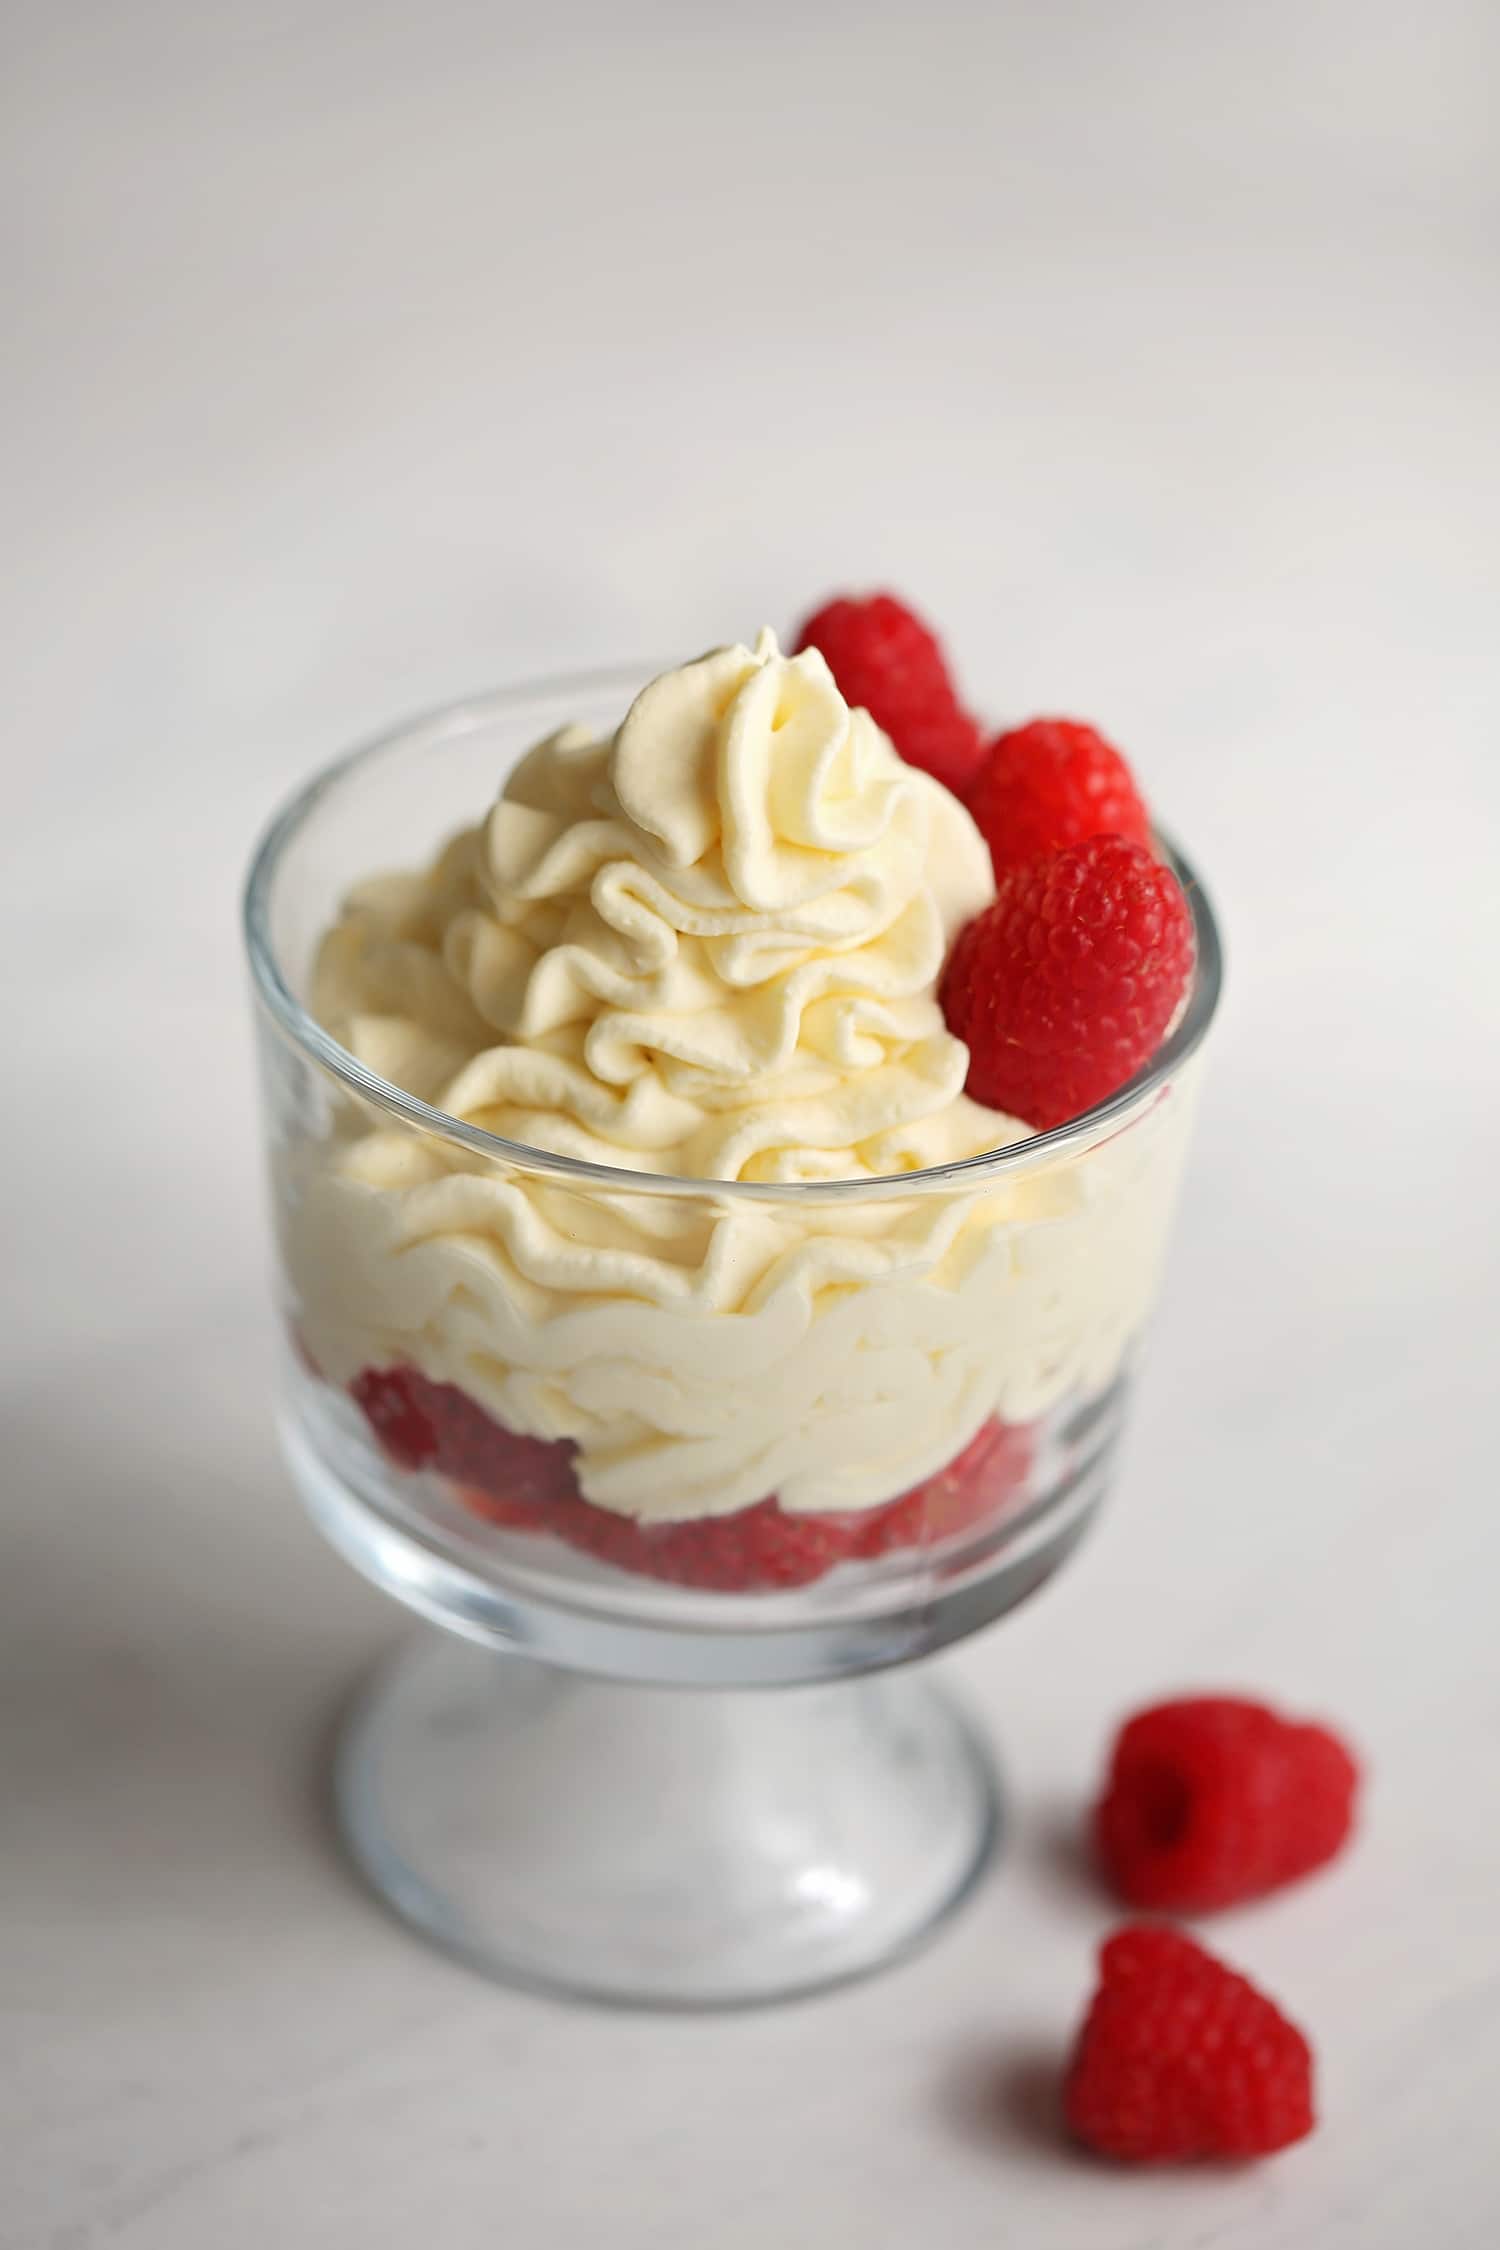 homemade whipped cream served in a glass with raspberries